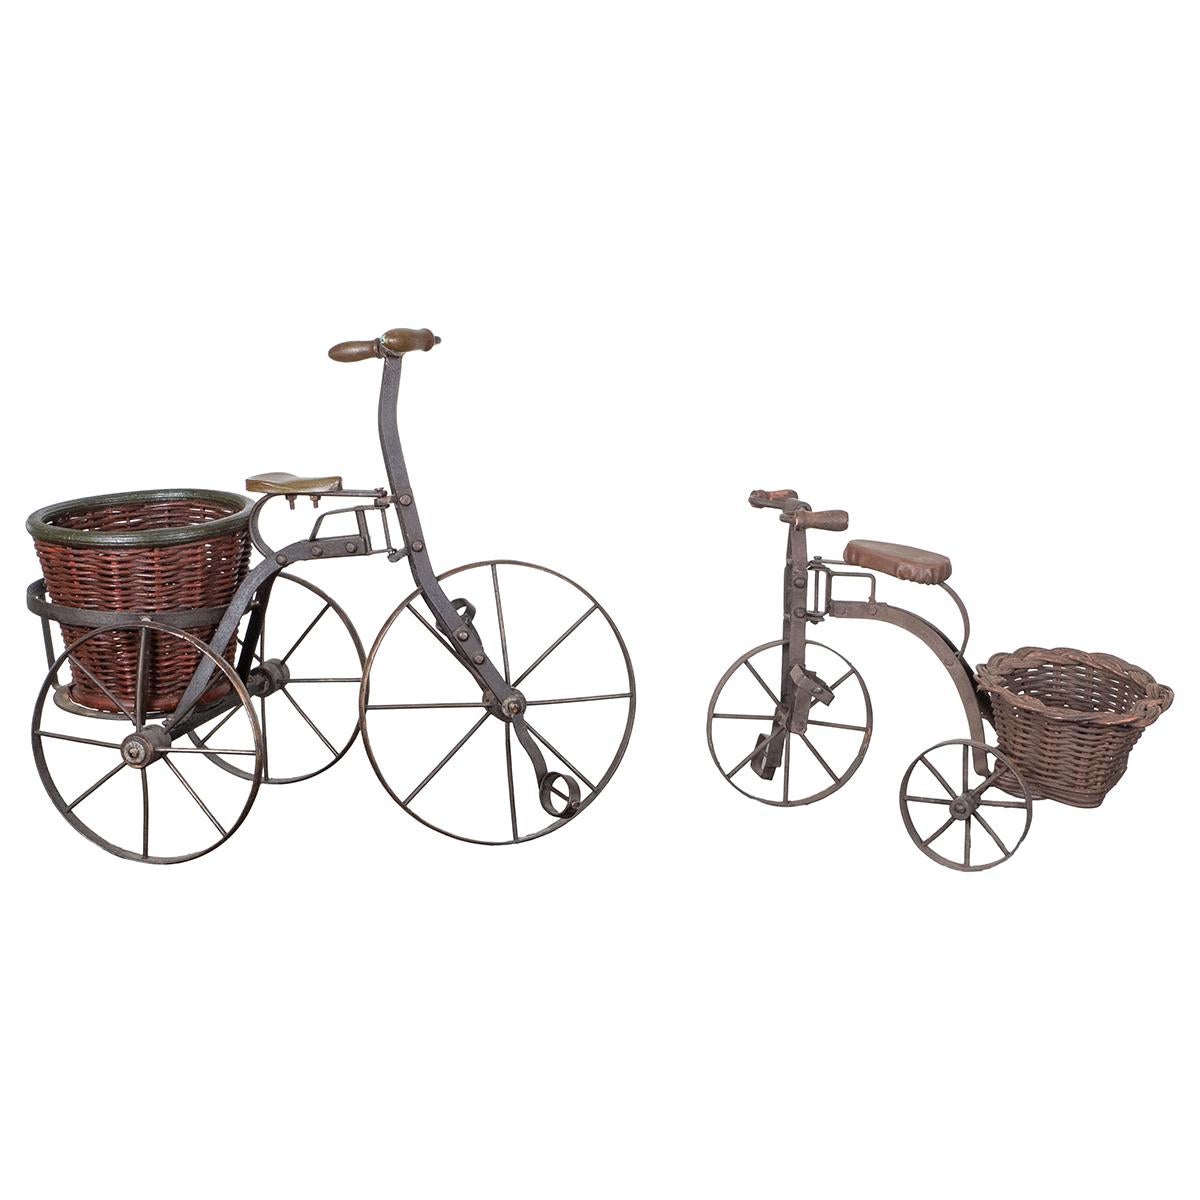 Pair of charming vintage hand-wrought iron tricycle sculptures with wicker cargo baskets.

Large tricycle: 18.5